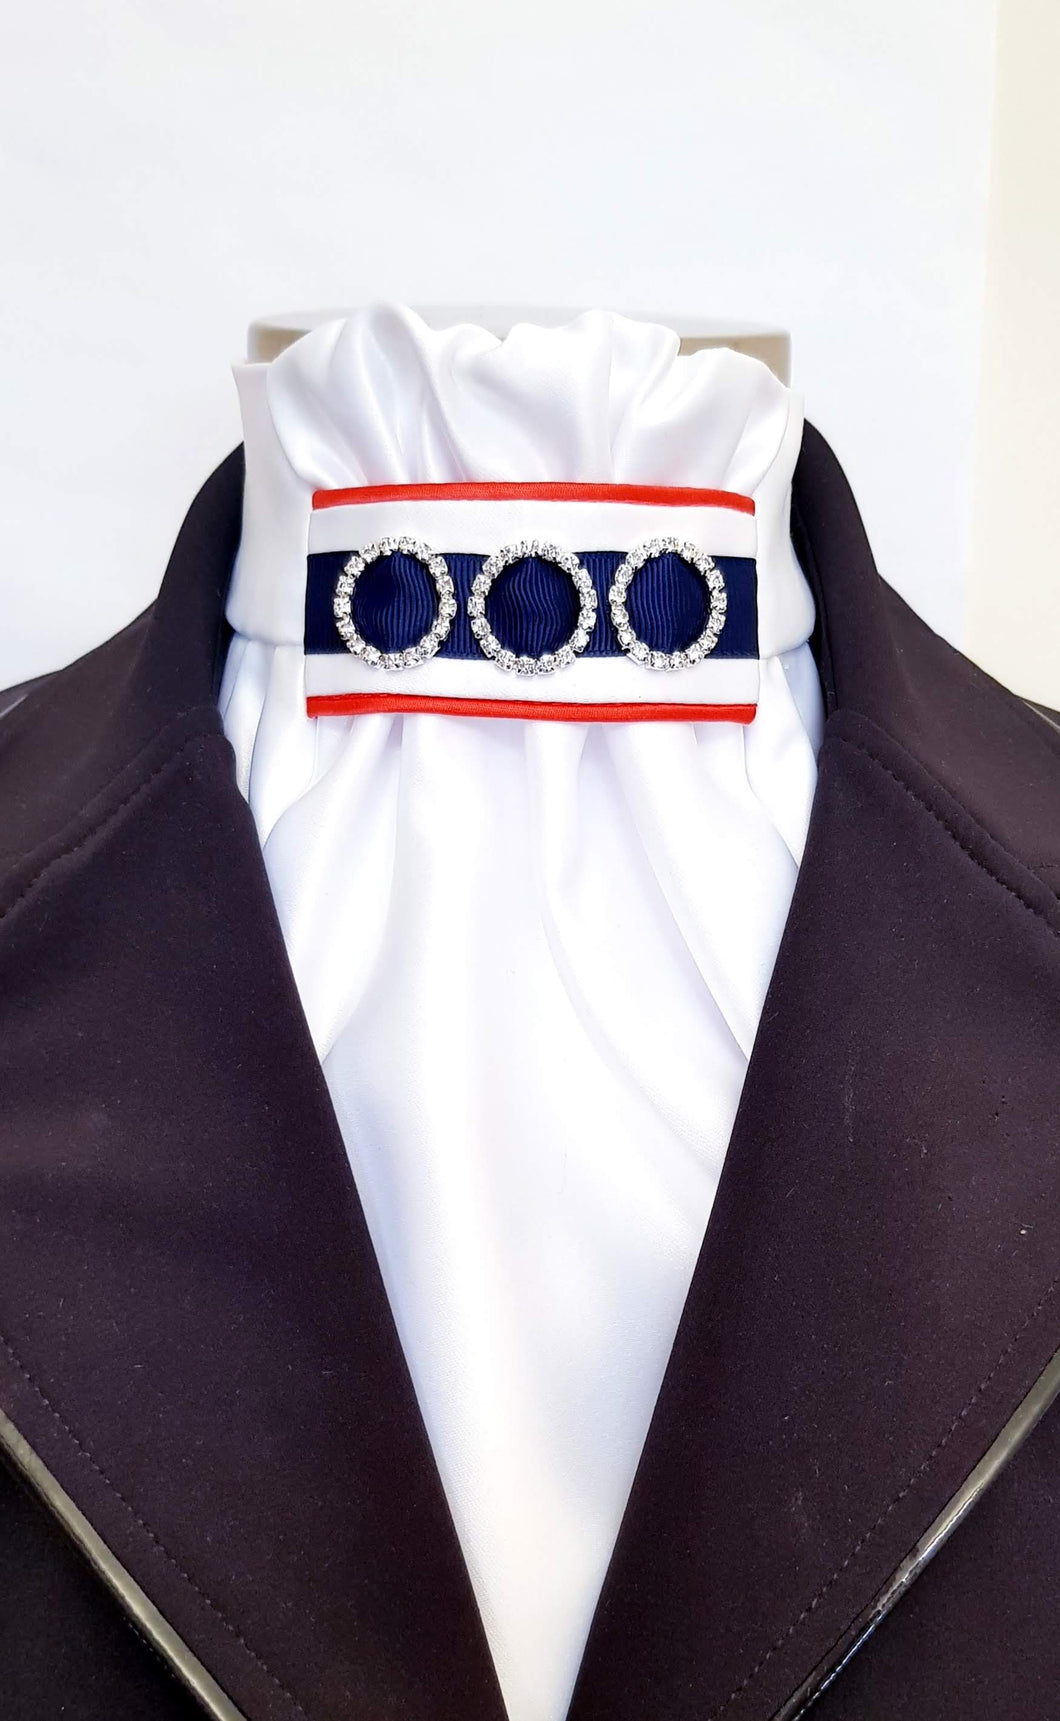 ERA EURO REGAL STOCK TIE - White satin, red piping, navy trim and crystal rings